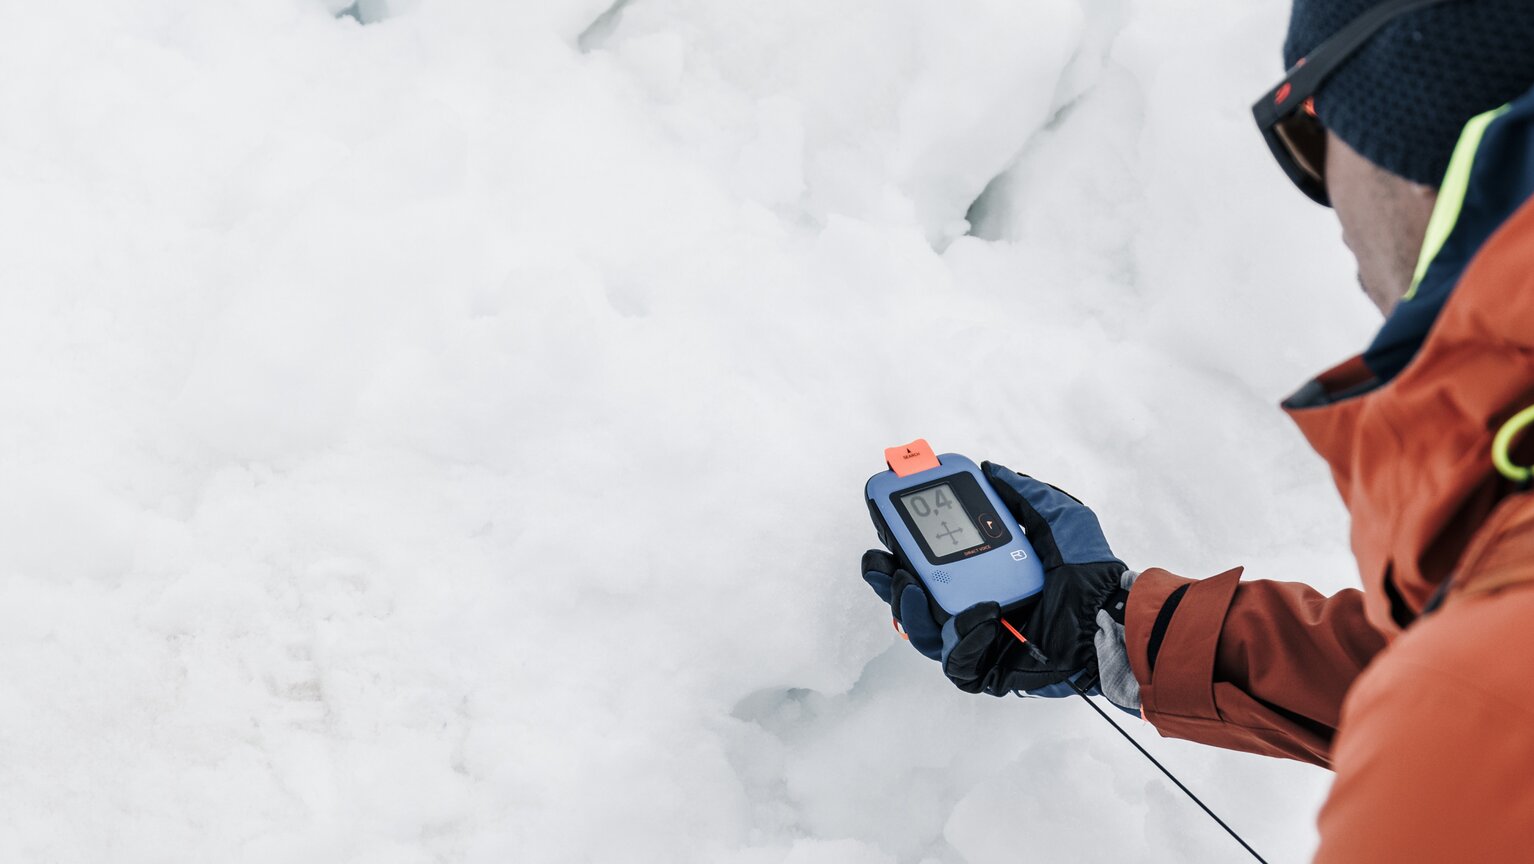 avalanche transceivers